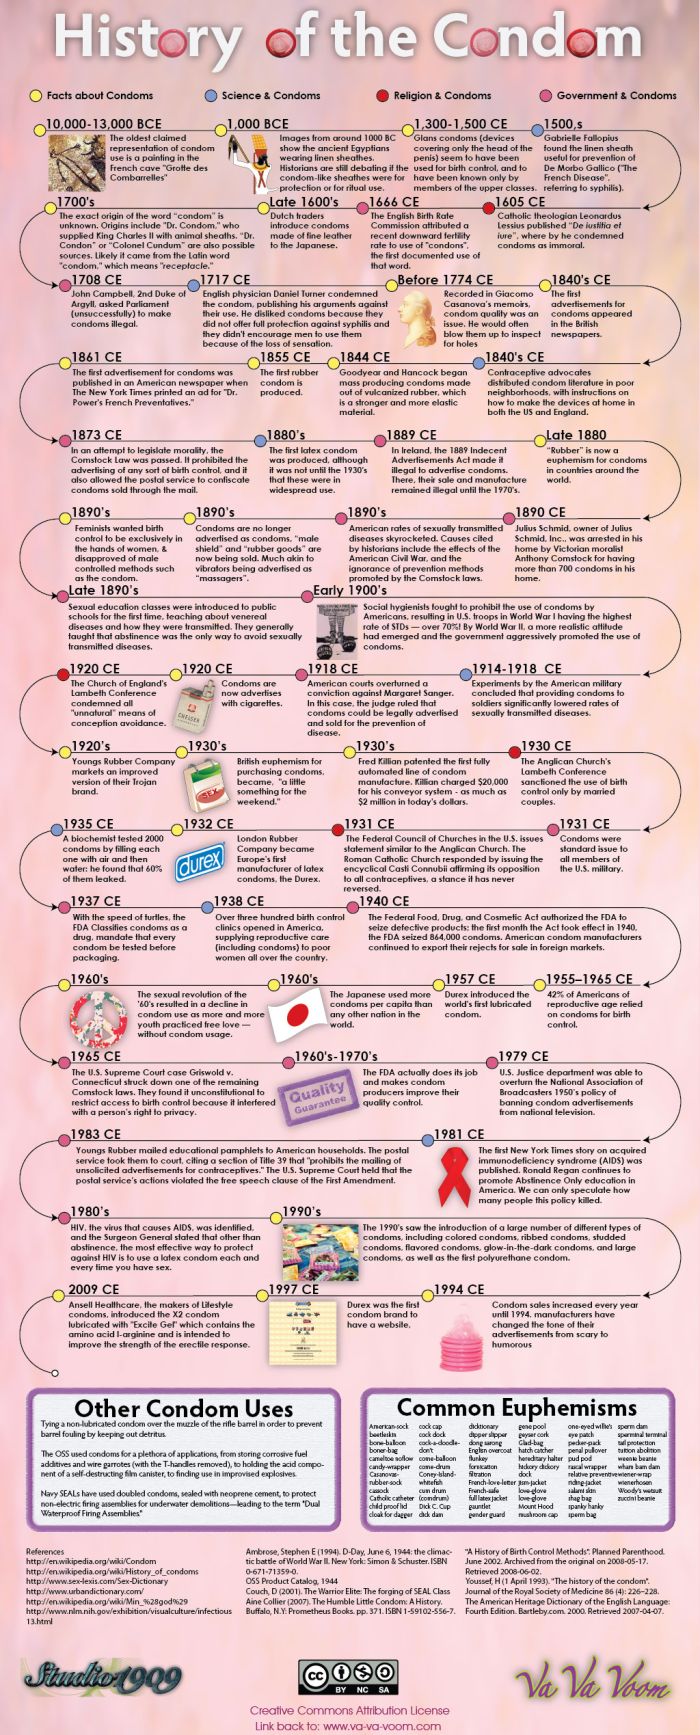 History of the Condom (infographic)